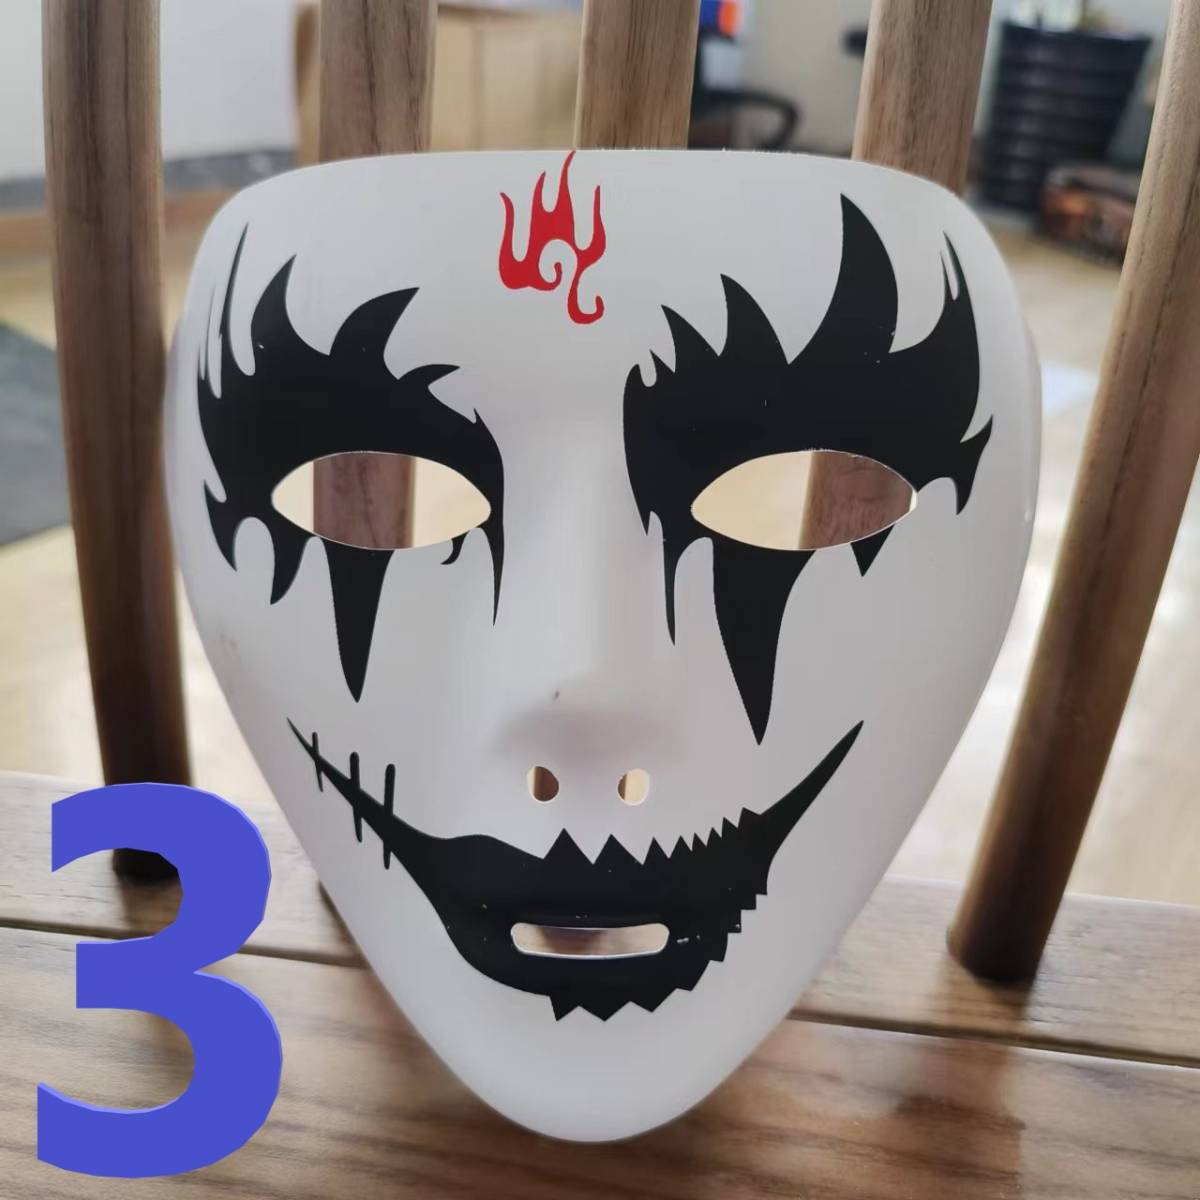  Halloween costume mask piero3... un- . taste .... face mask cosplay party. properties woman for man. fancy dress costume mask 